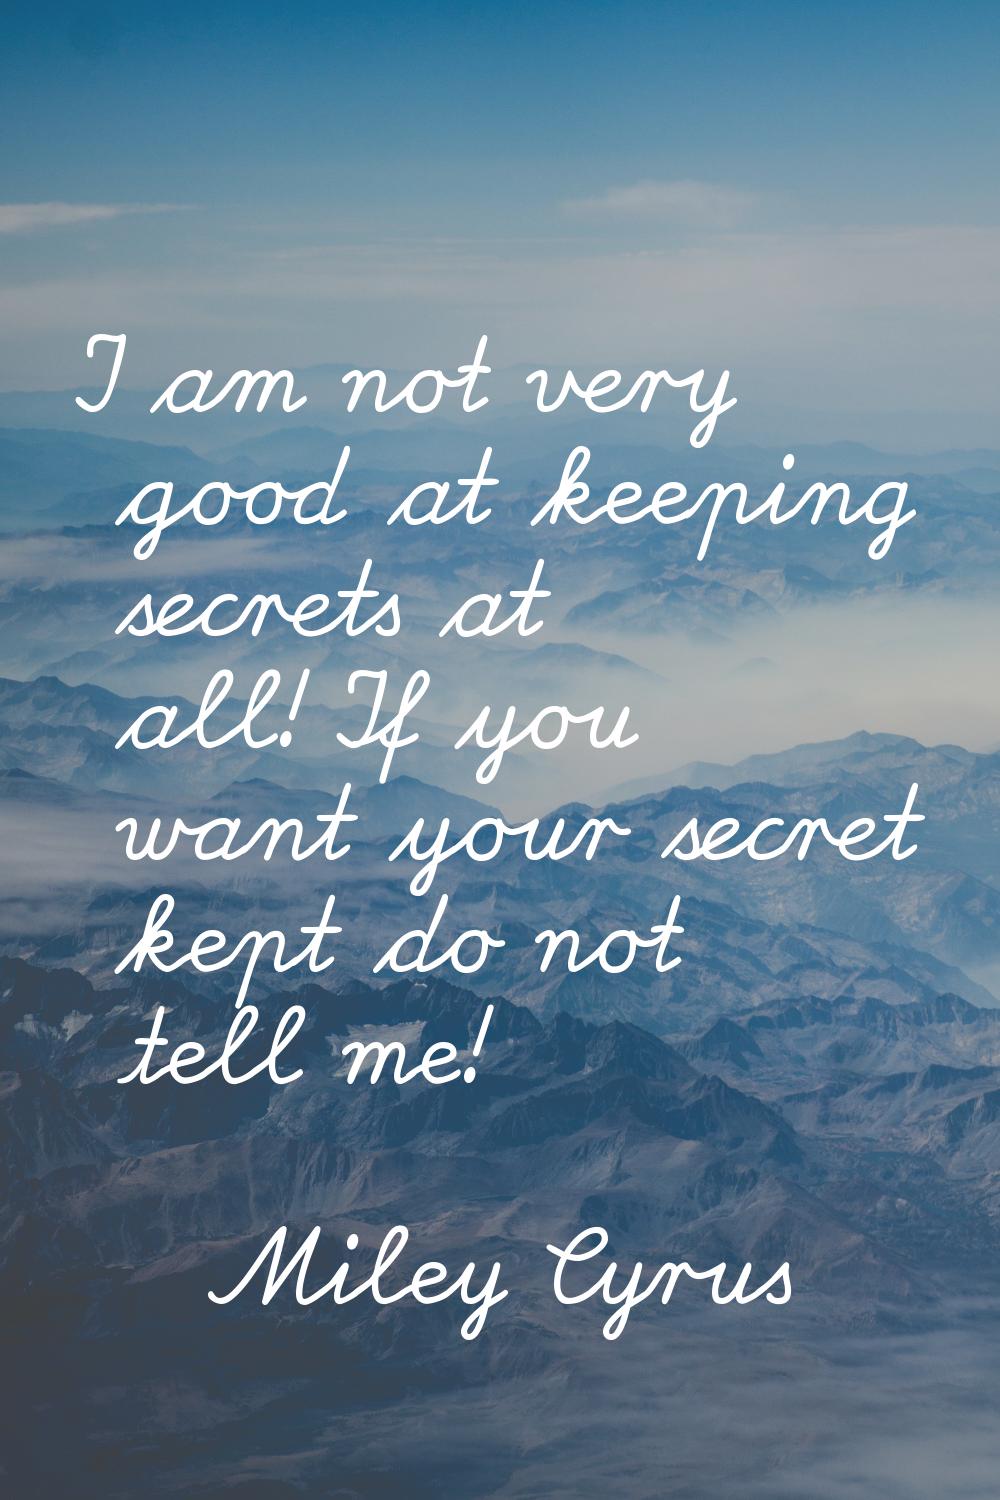 I am not very good at keeping secrets at all! If you want your secret kept do not tell me!